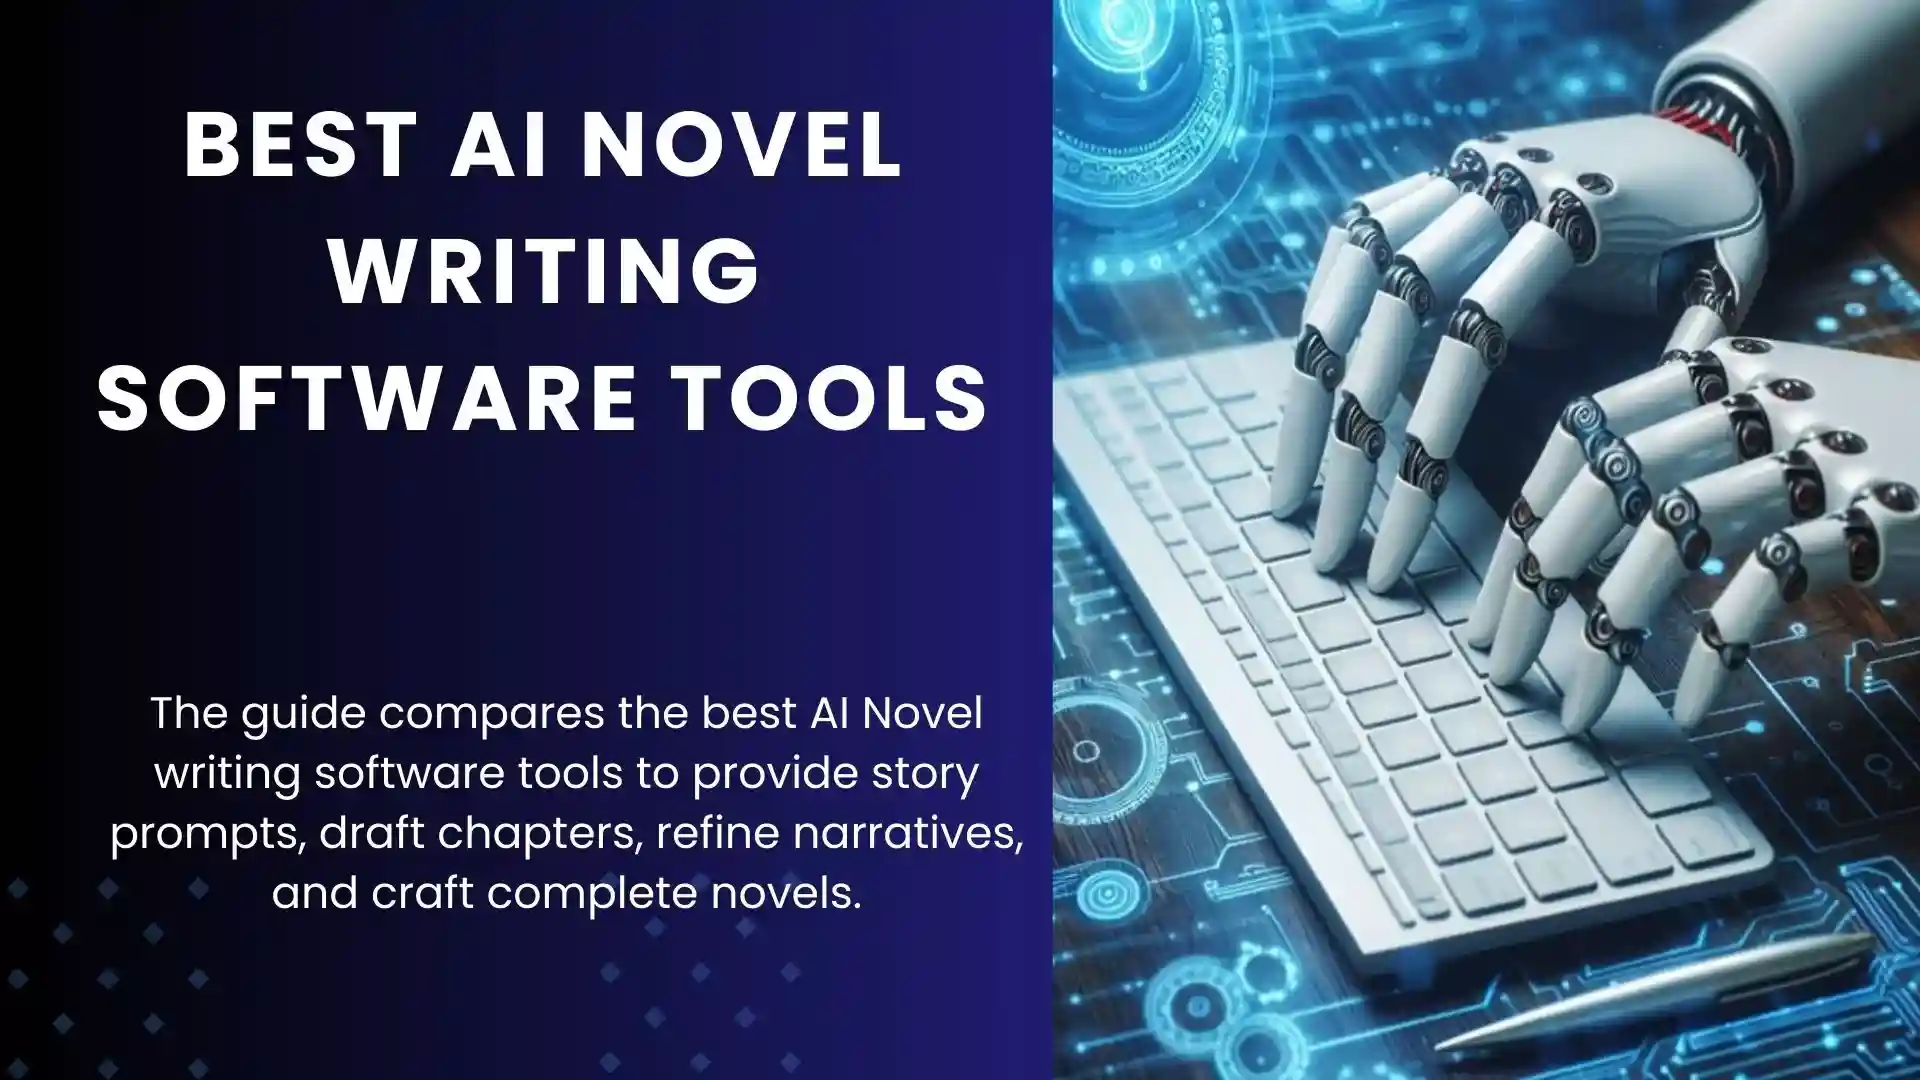 A featured image for the best AI AI Novel Writing Software tools shown by a robot hand typing